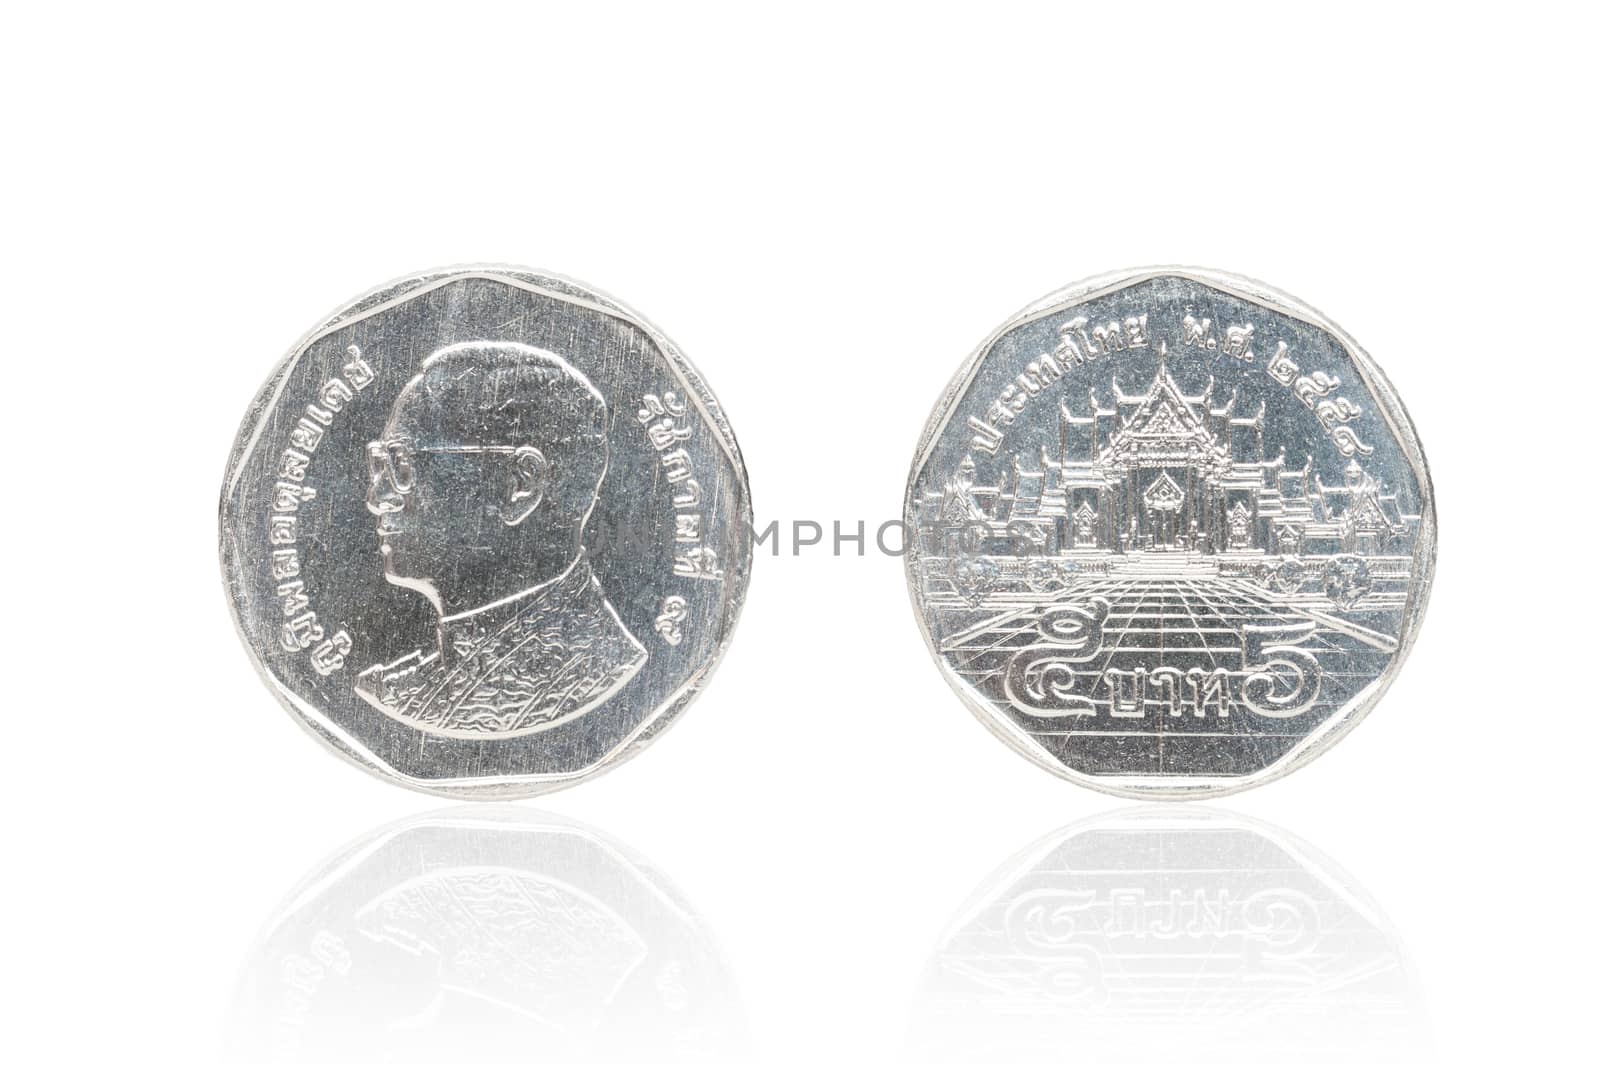 Thai coin 5 baht and reflect. by stigmatize